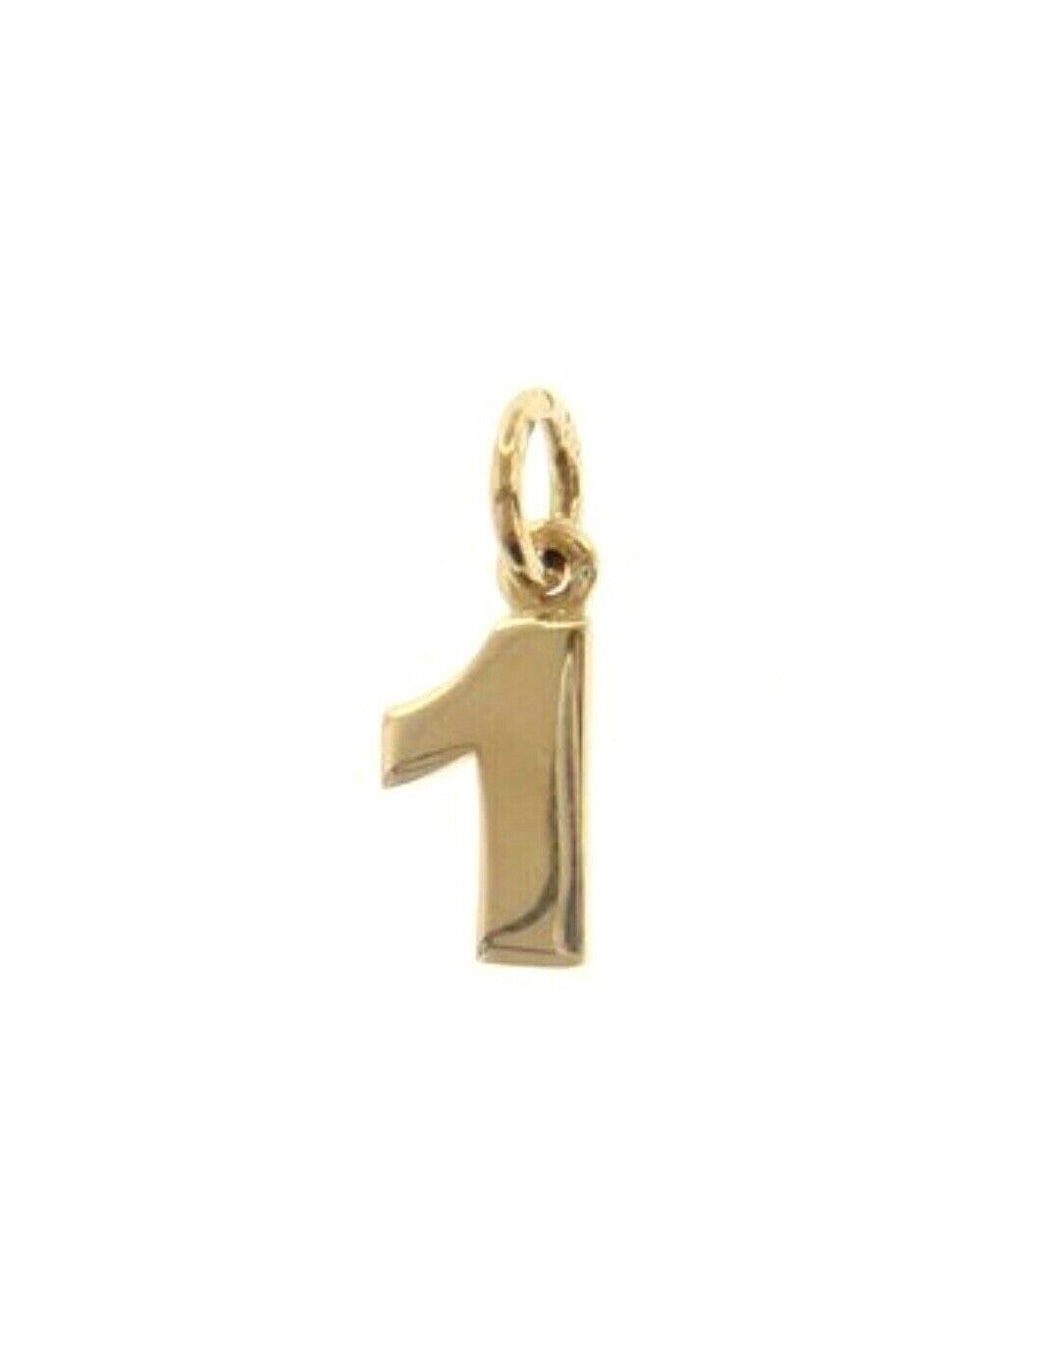 18k yellow gold number 1 one small pendant charm, 0.4